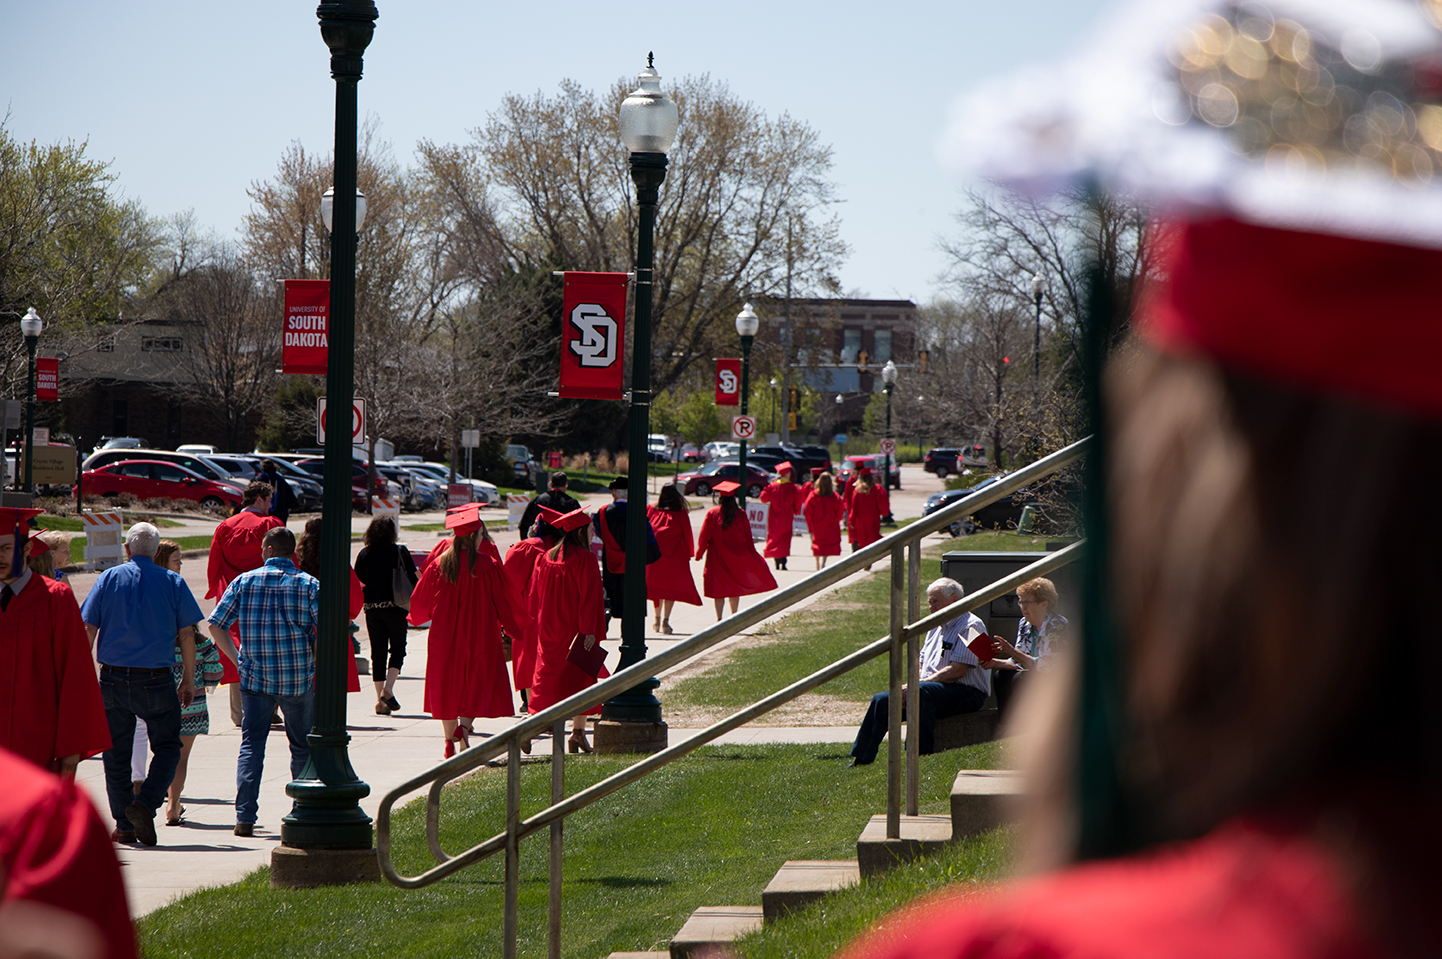 USD to host October commencement for spring 2020 graduates